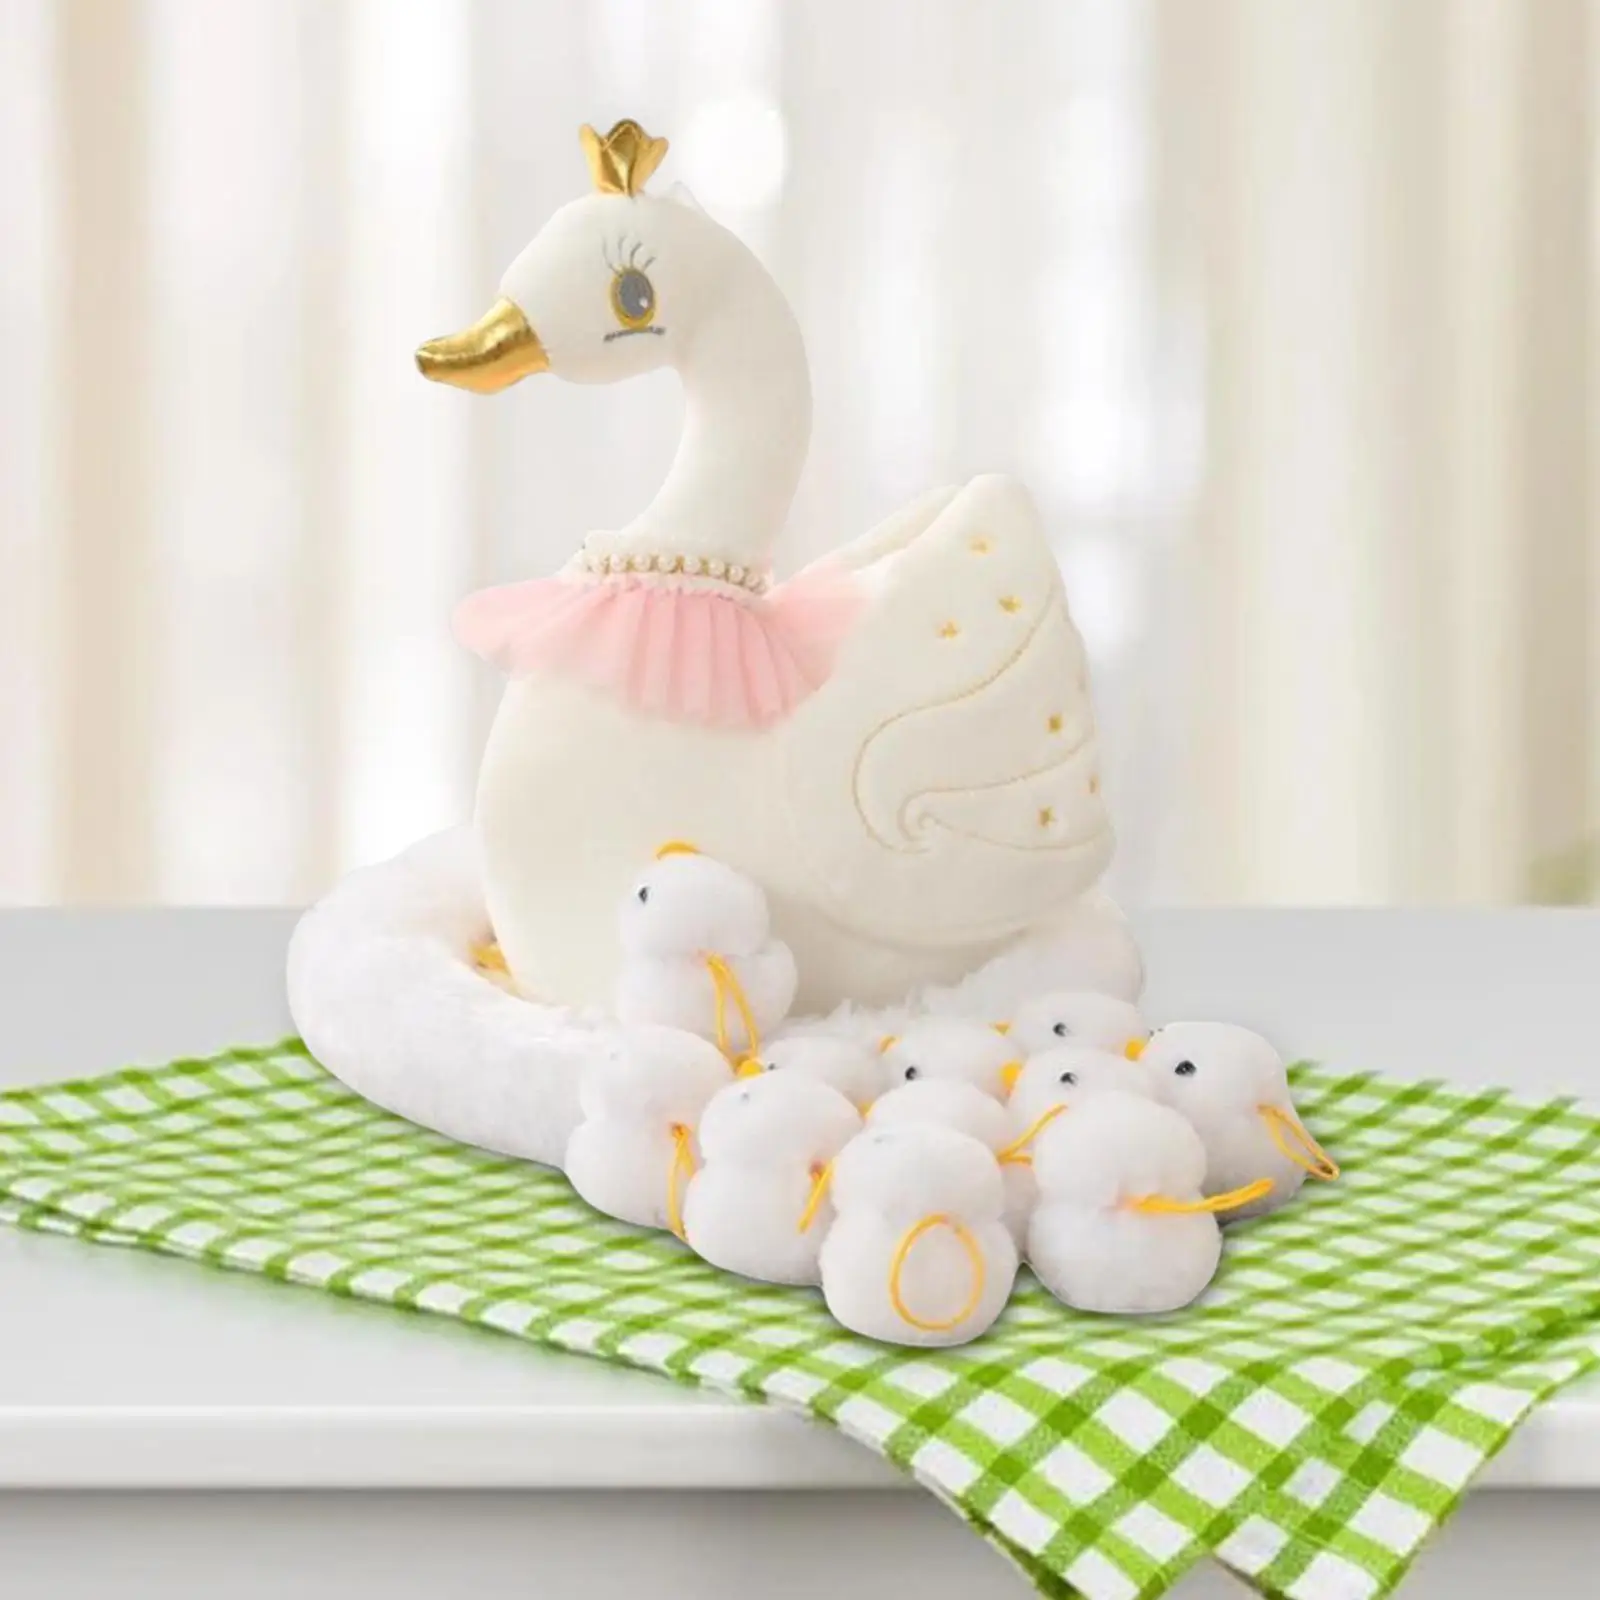 Animal Plush Toy Swan Sculpture Nest Stuffed Lovely for Easter Lawn Patio Decoration